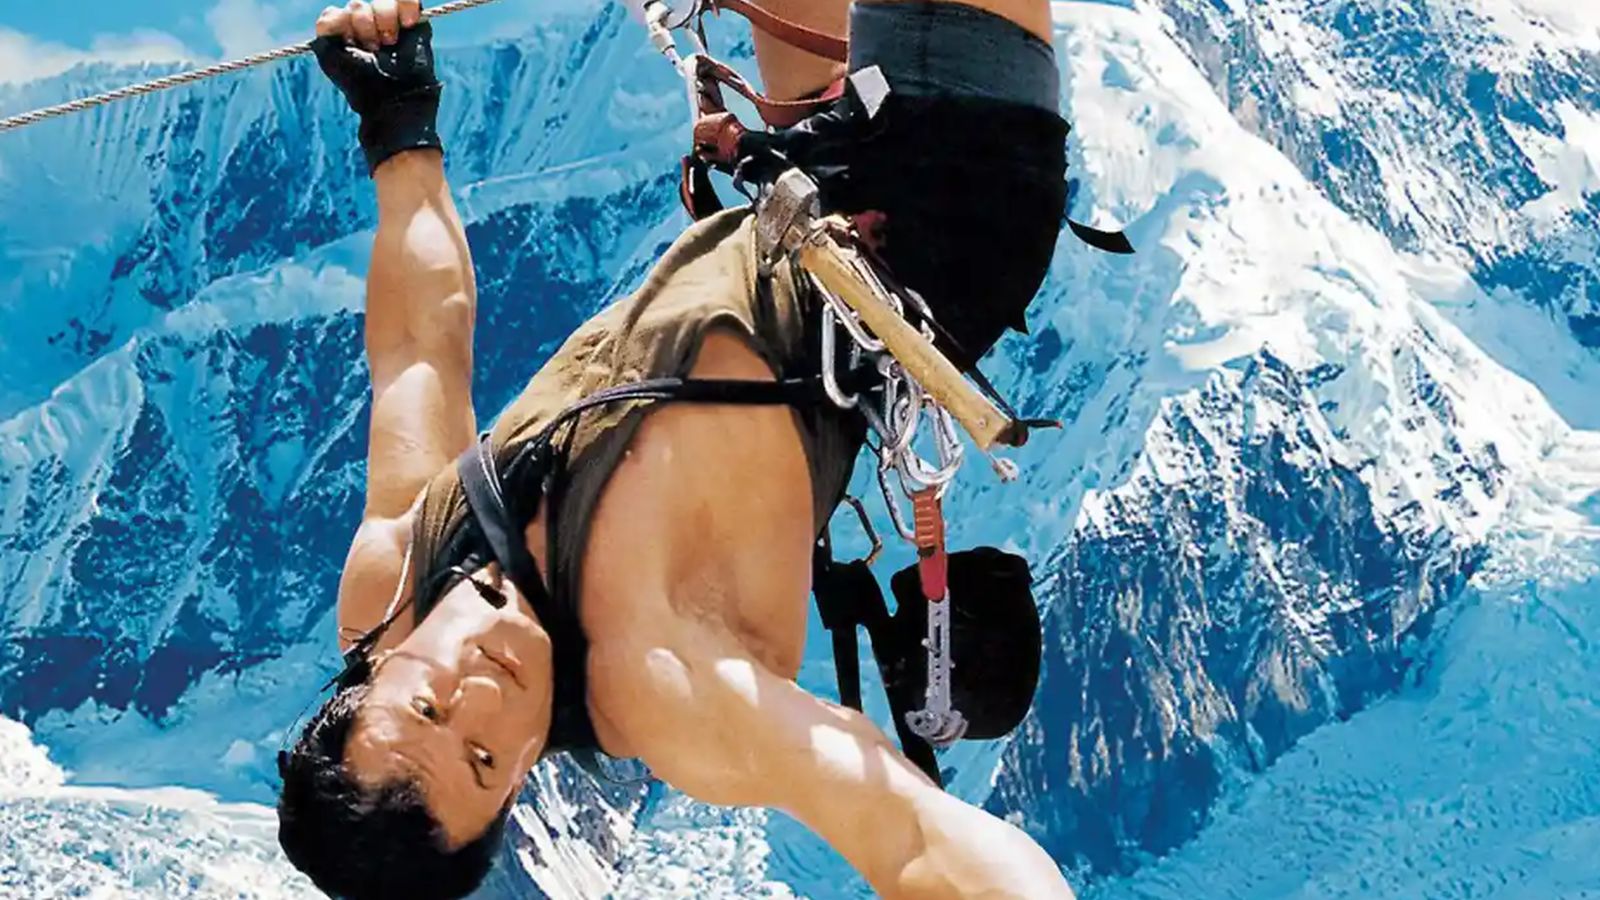 Cliffhanger 2: plot details revealed for the sequel with Sylvester Stallone